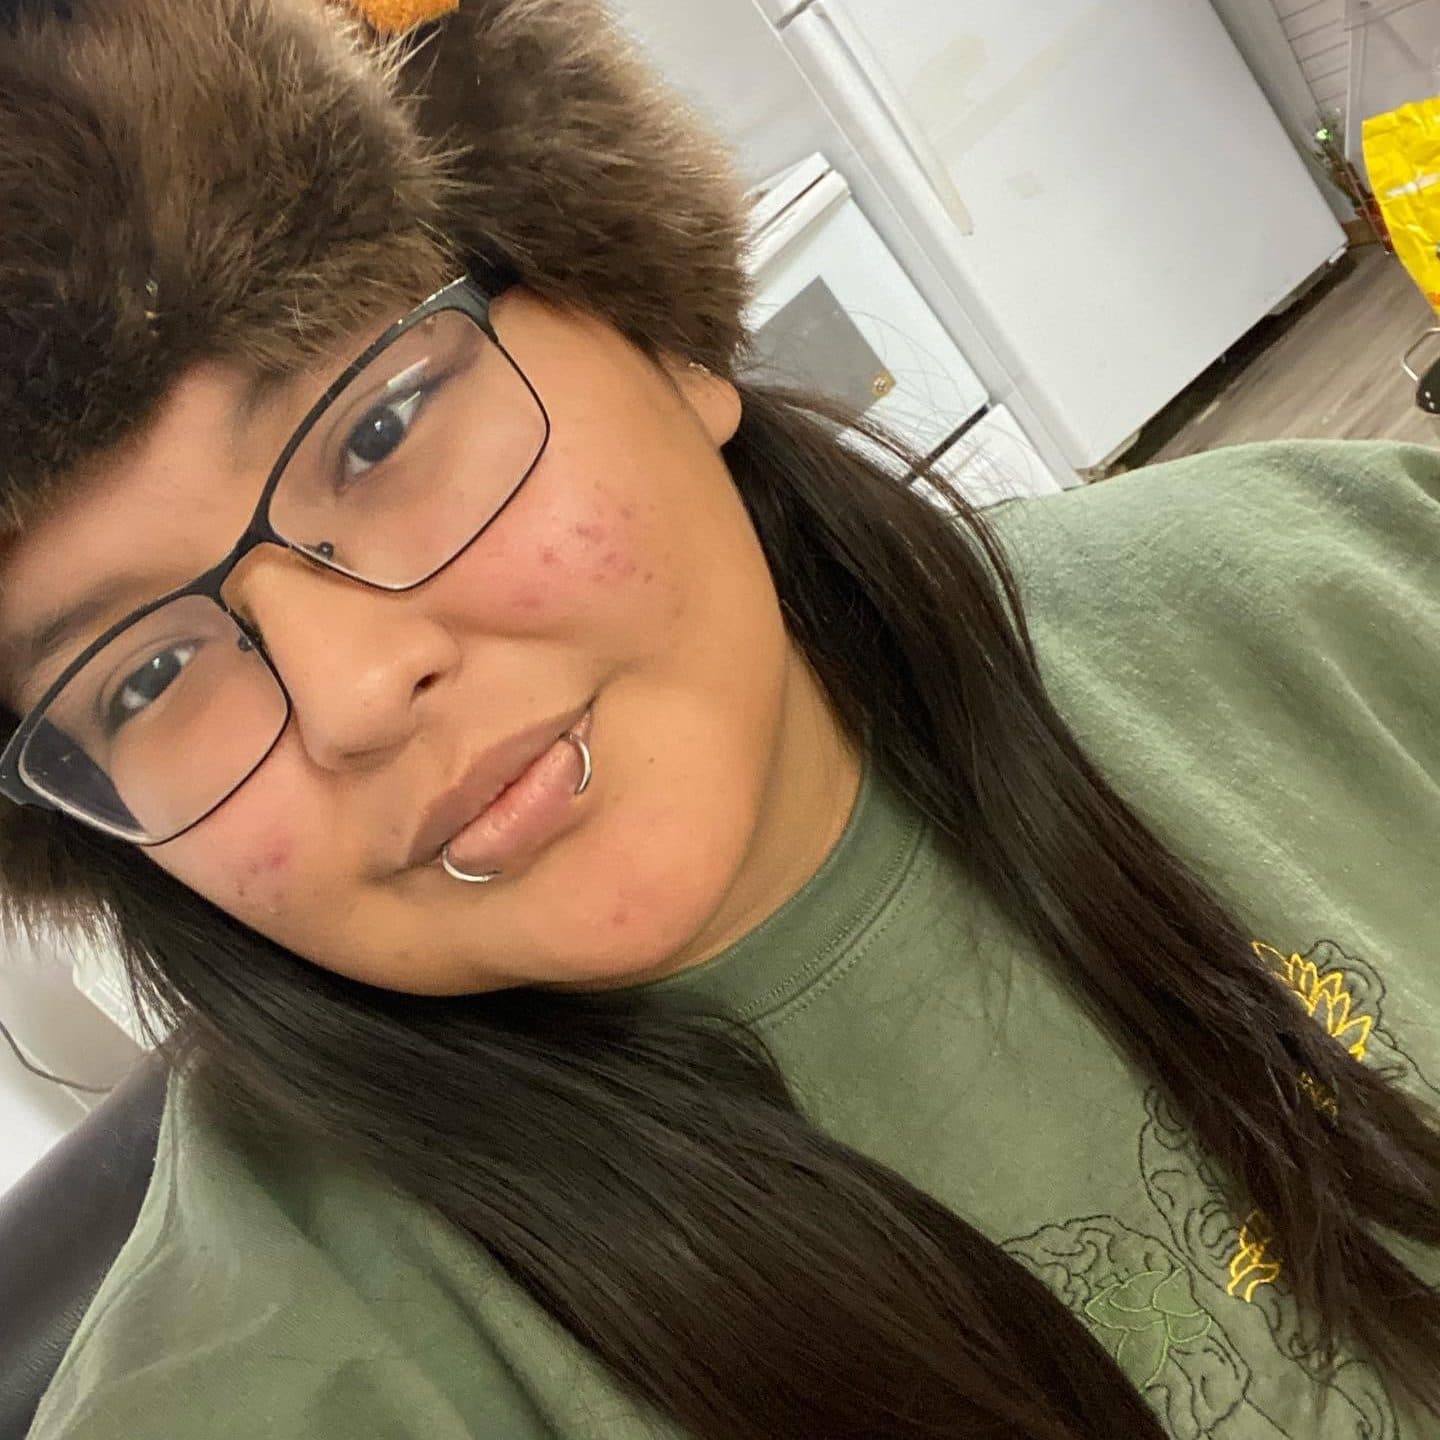 A person with long brown hair wearing a fur hat and glasses smils for the camera